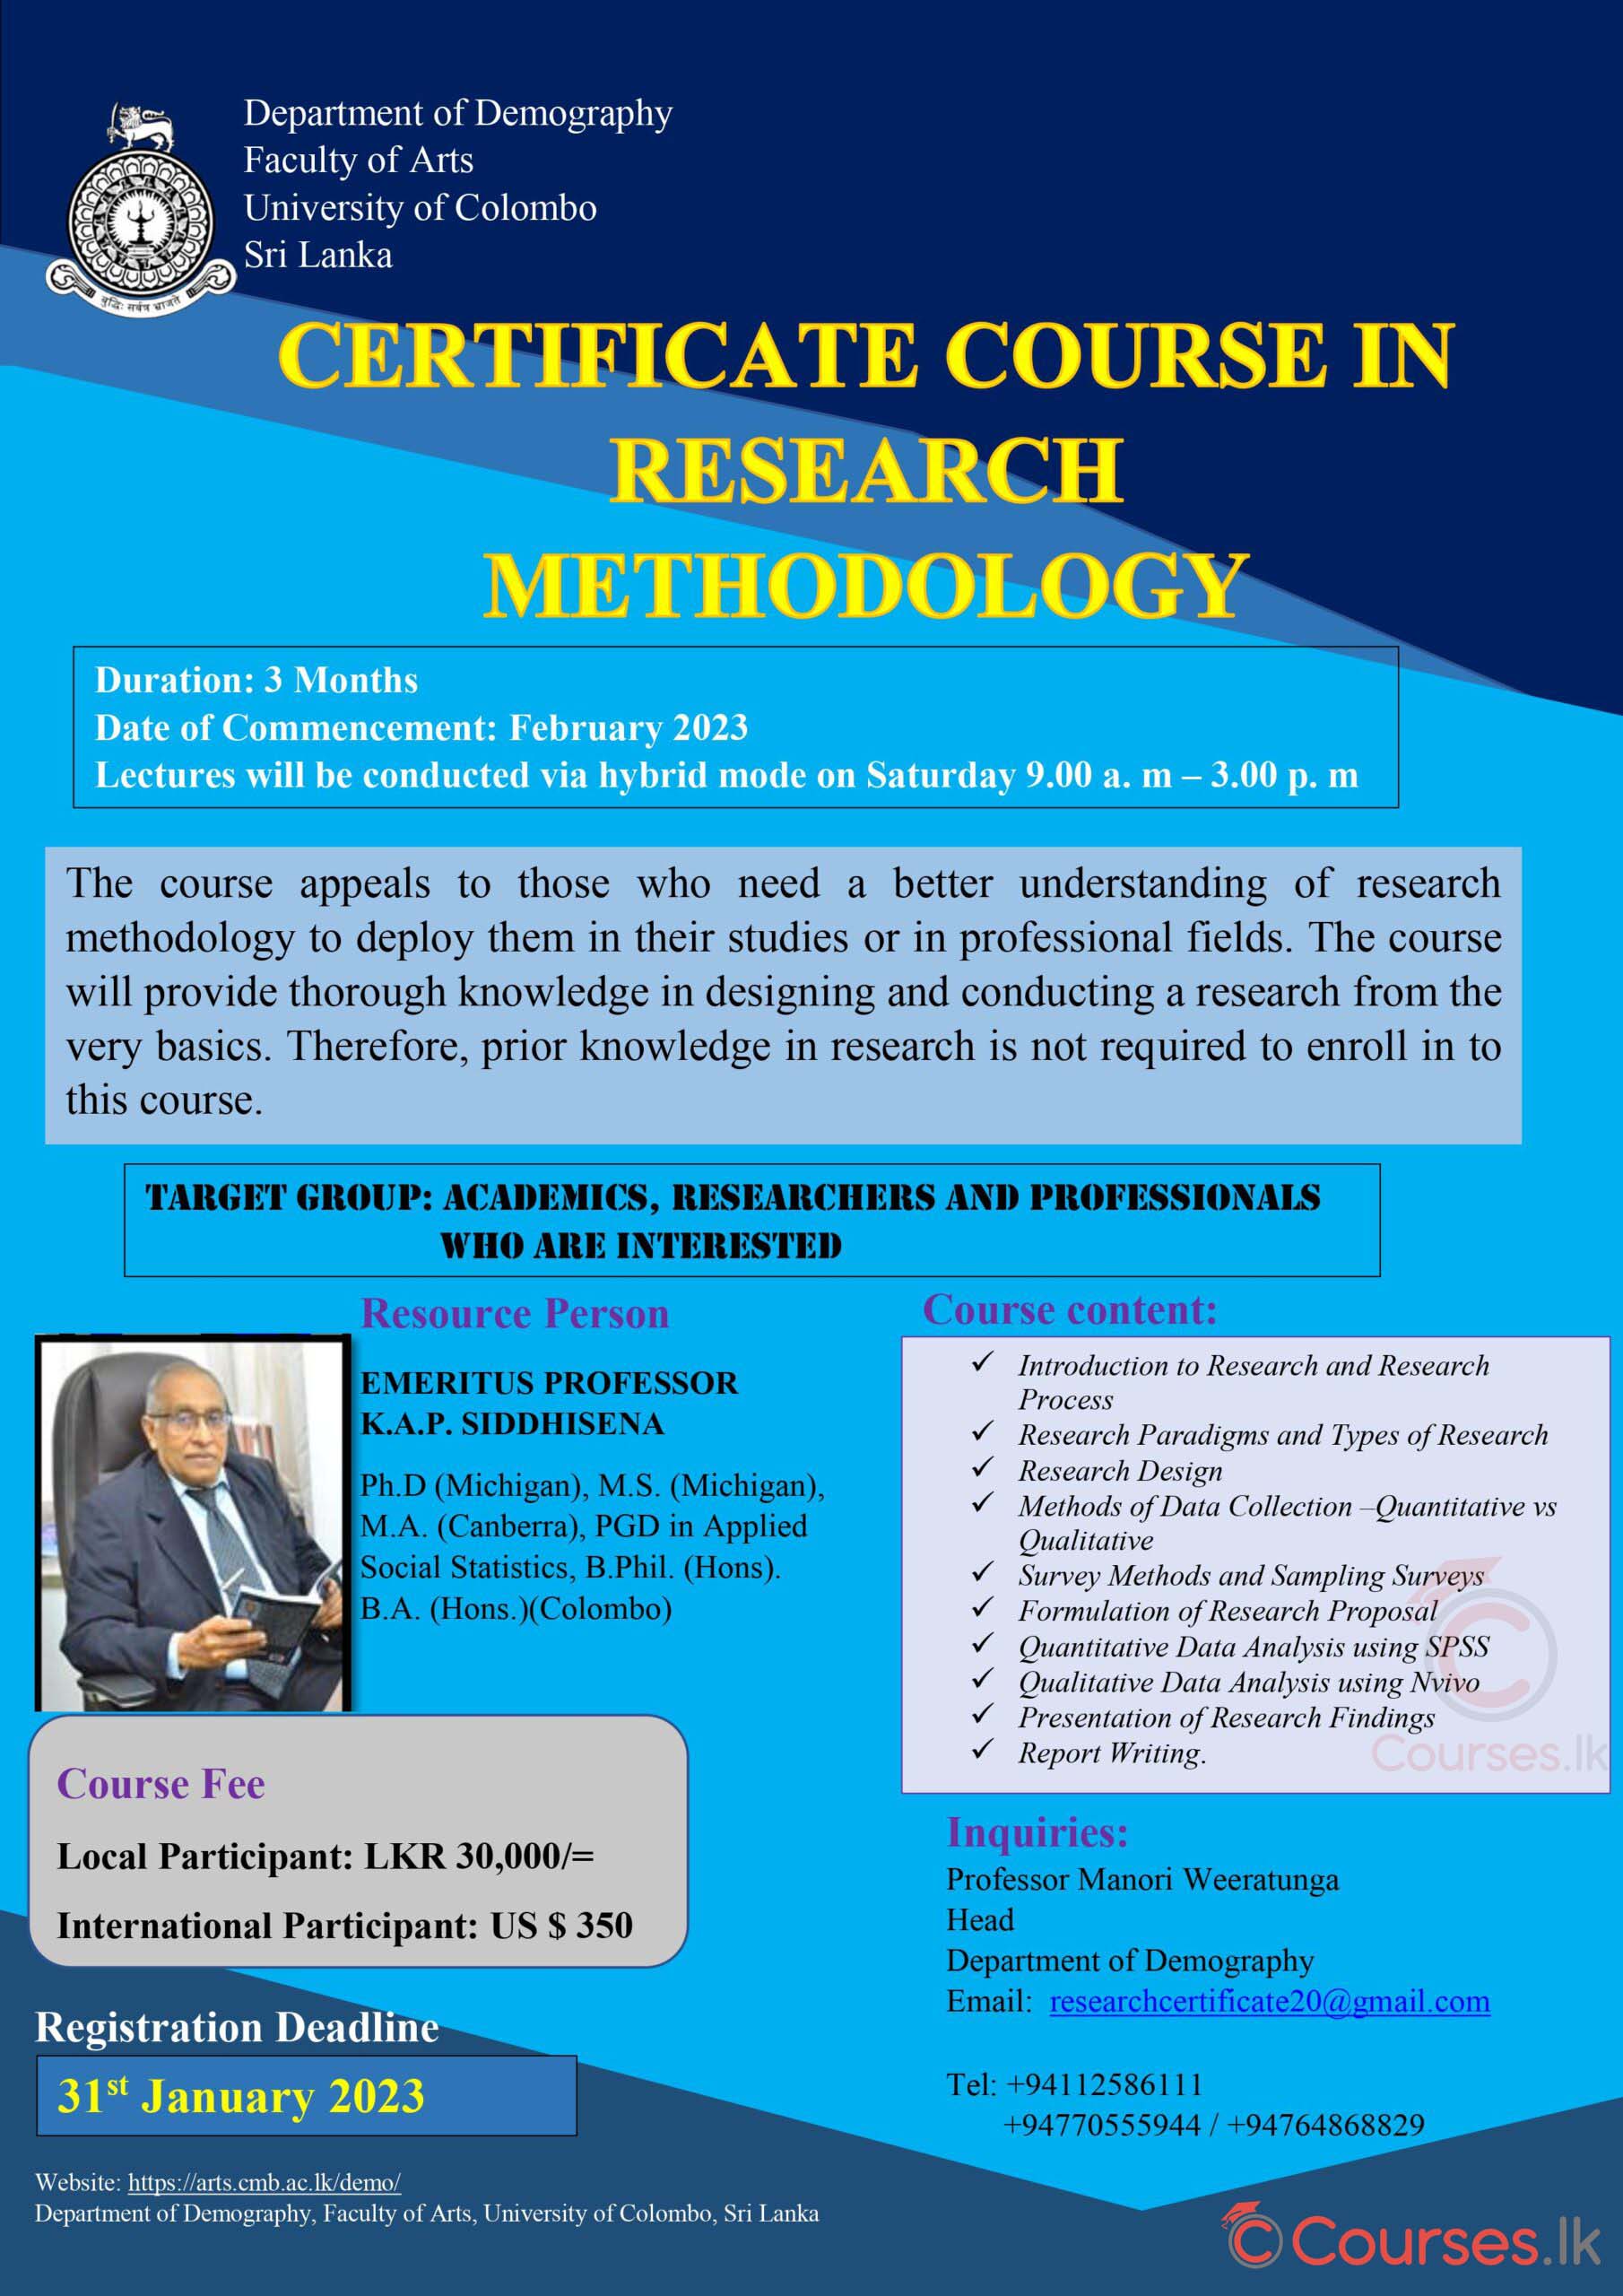 Certificate Course in Research Methodology 2023 - University of Colombo